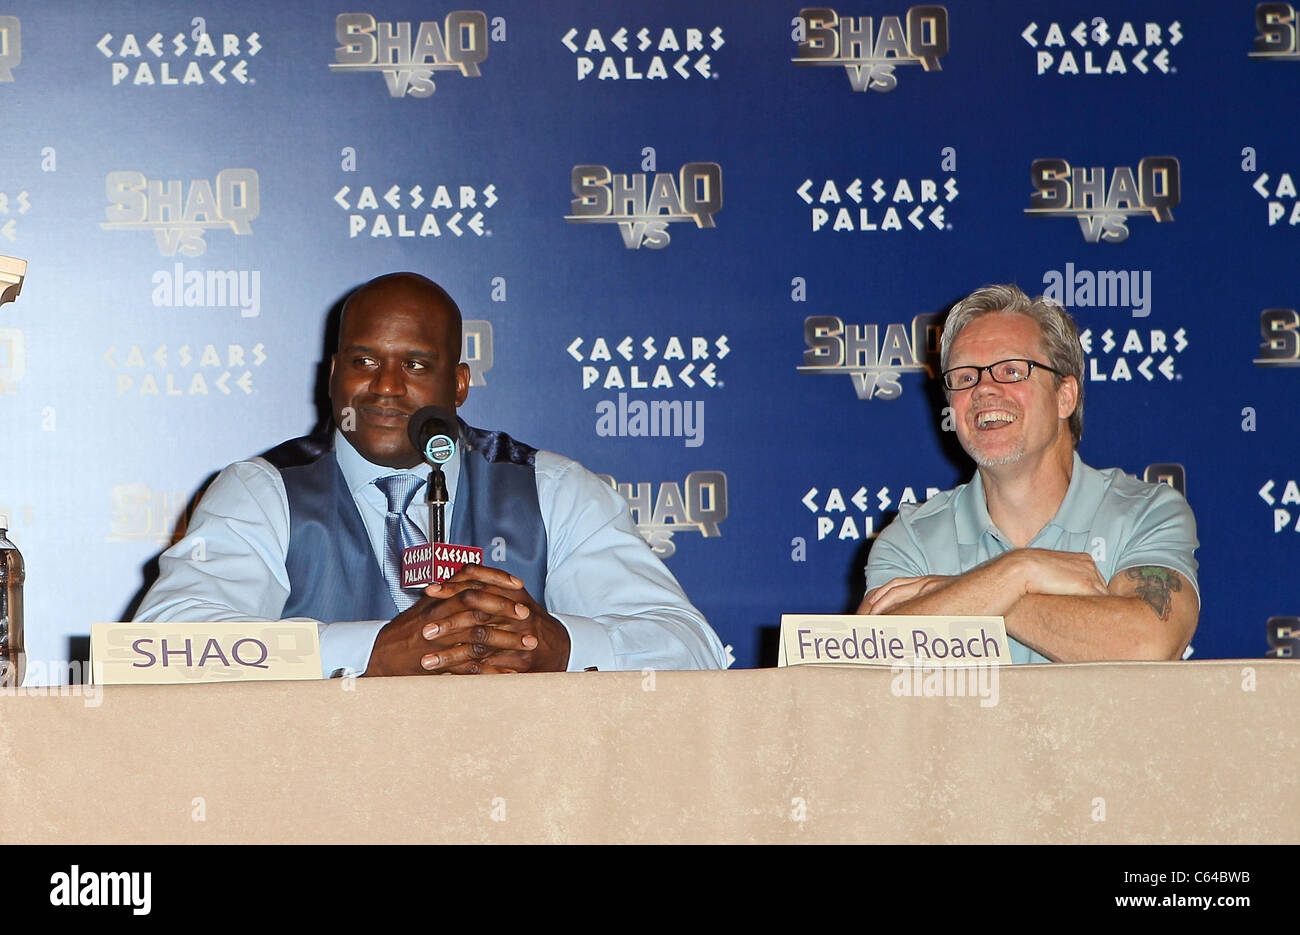 Shaquille O'Neal, Freddie Roach in attendance for Press Conference At Caesar's Palace For ABC's SHAQ VS., Caesar's Palace Hotel Stock Photo